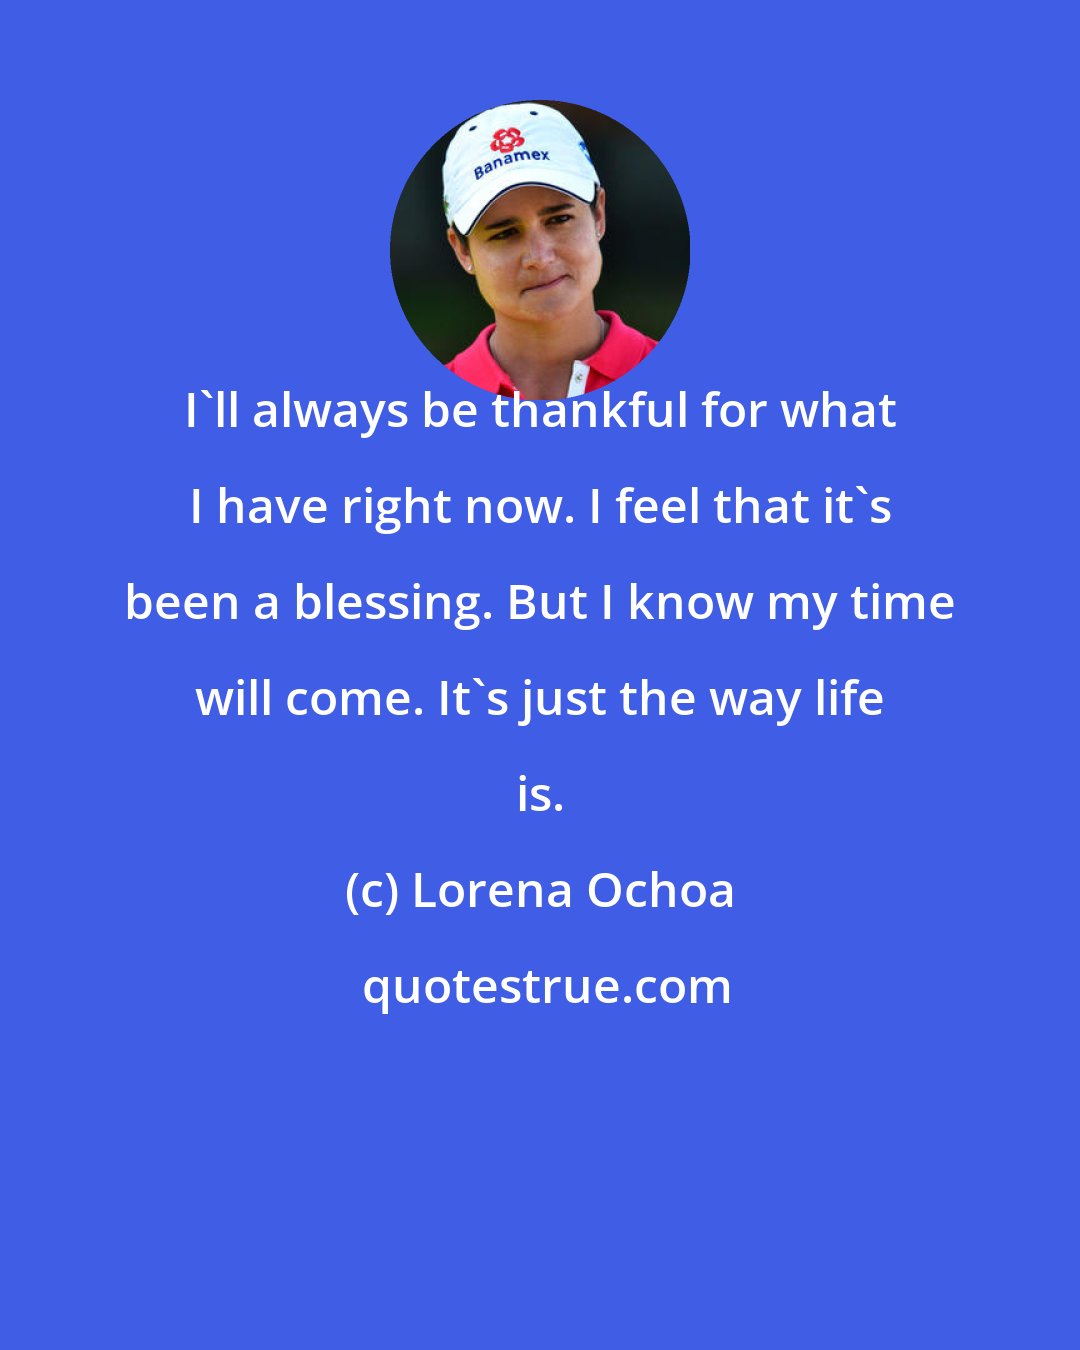 Lorena Ochoa: I'll always be thankful for what I have right now. I feel that it's been a blessing. But I know my time will come. It's just the way life is.